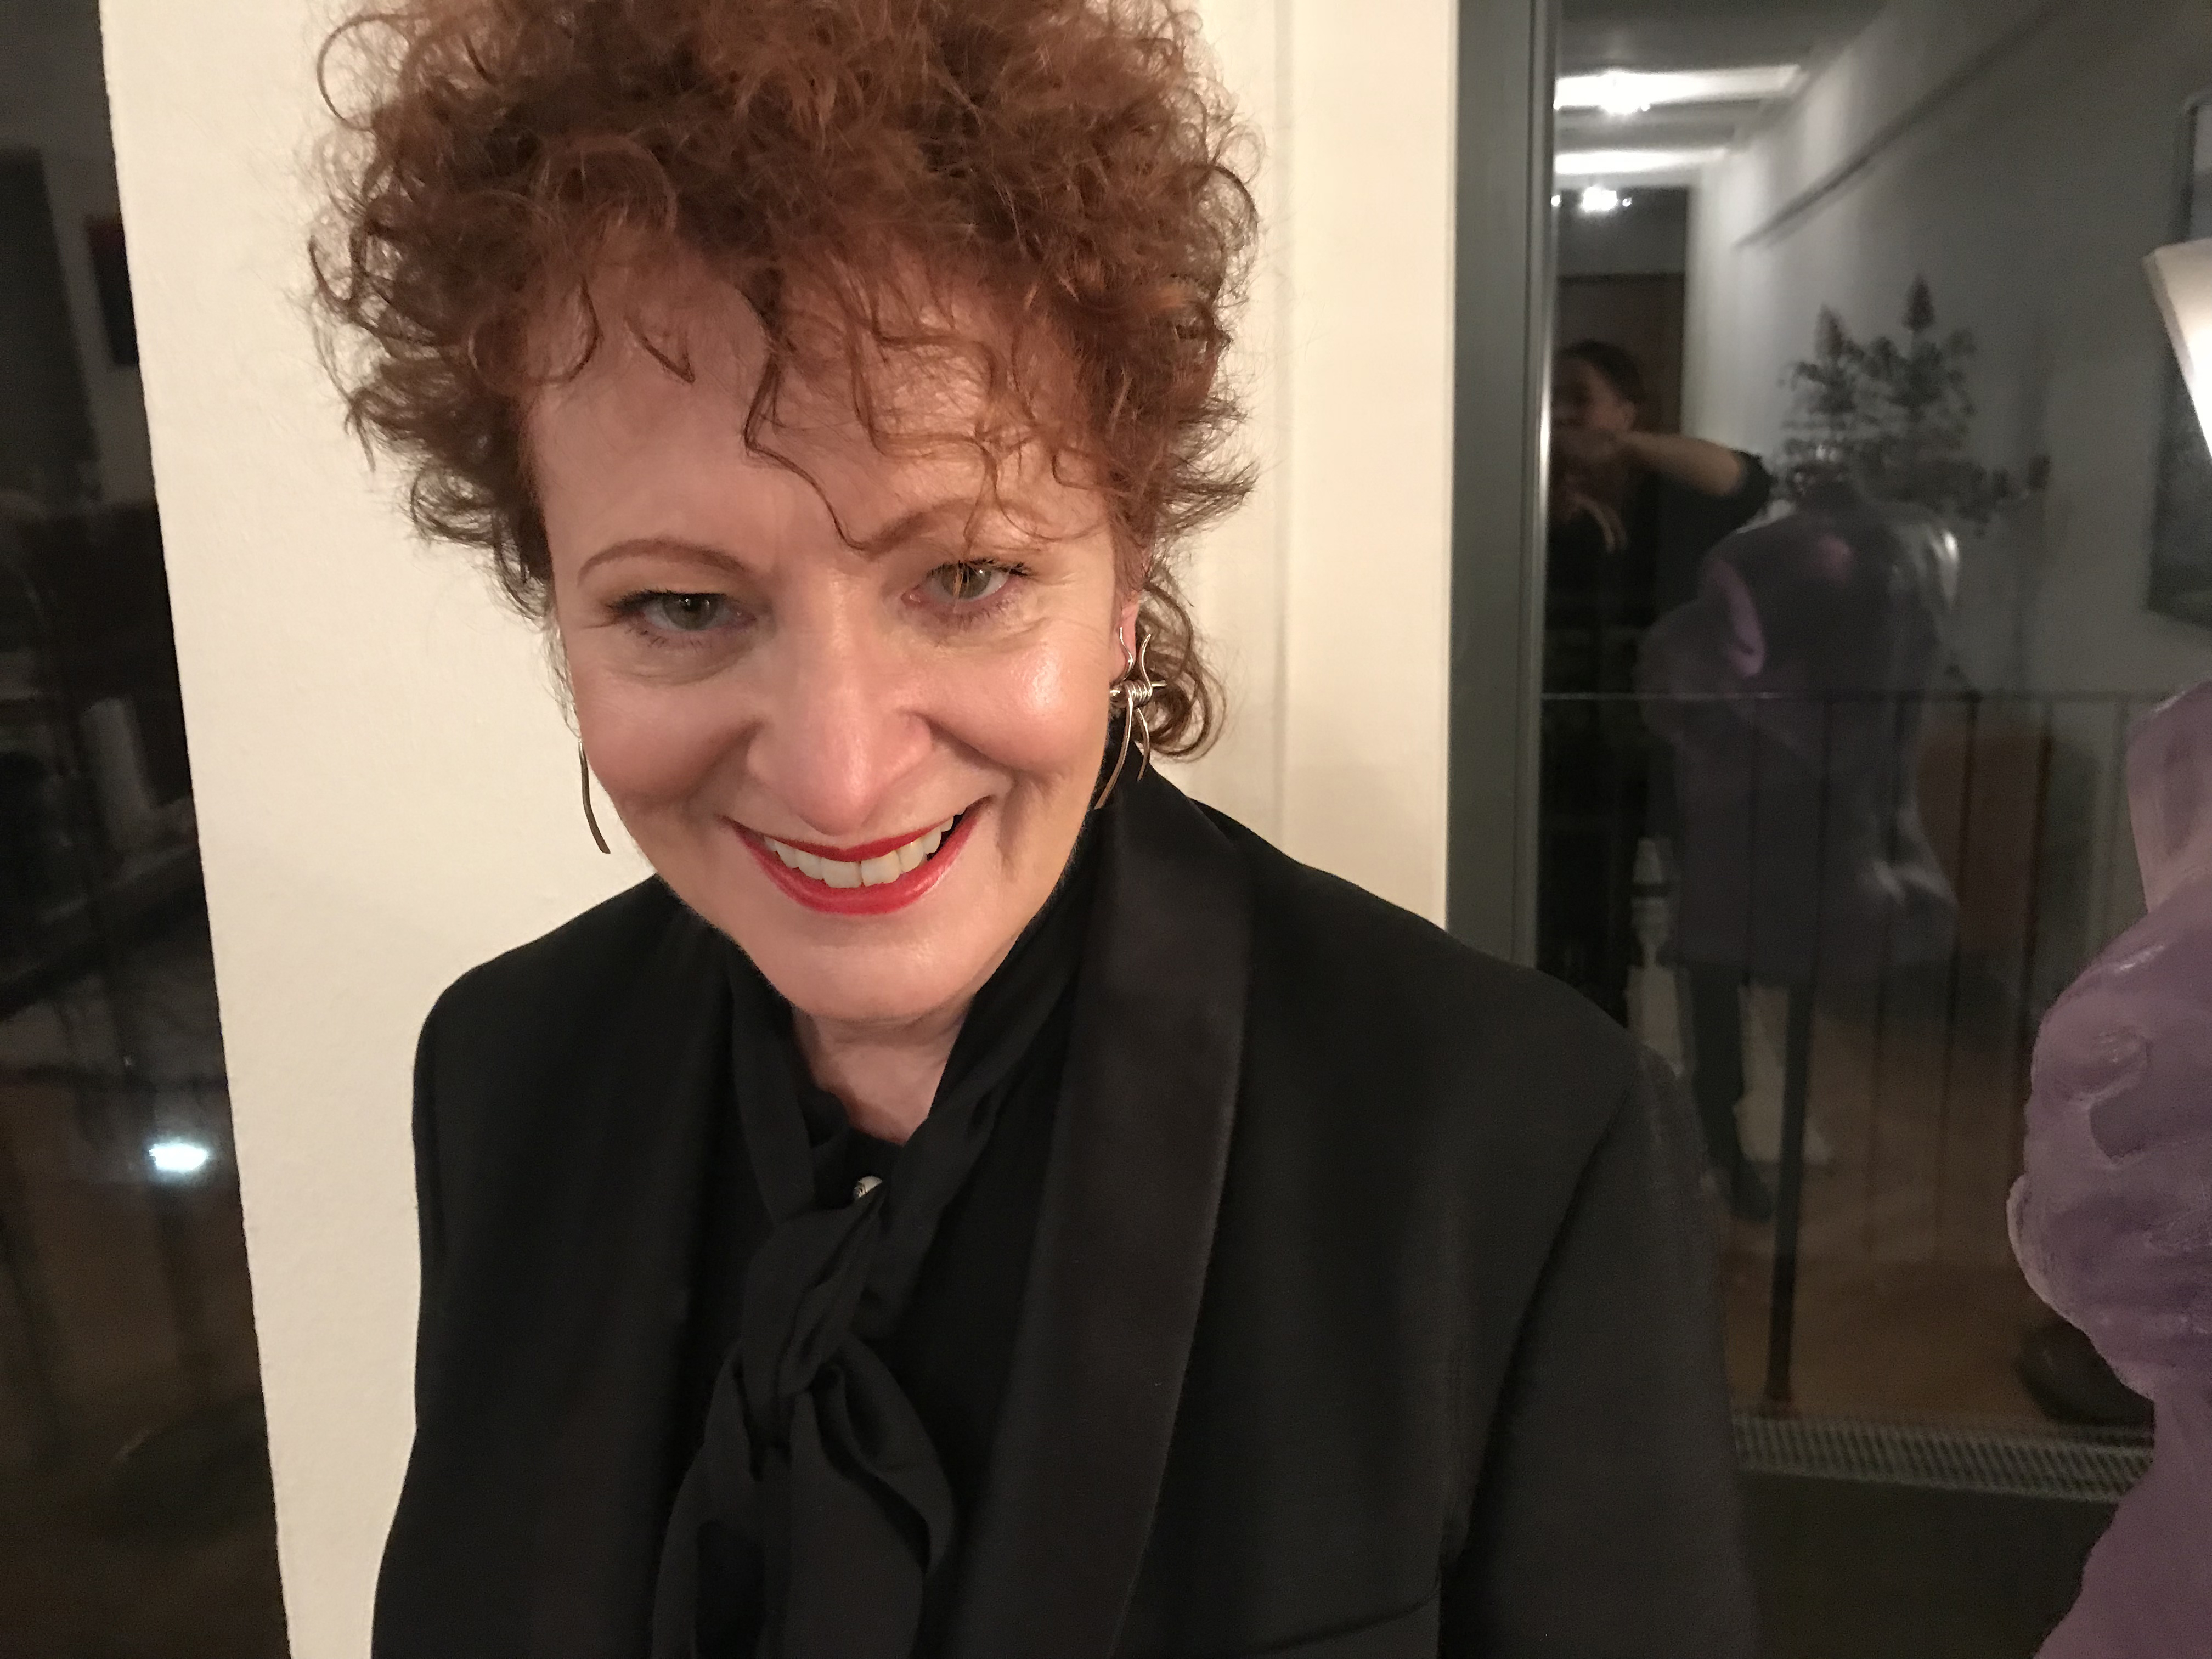  Portrait of Nan Goldin in an unidentified indoor space. She is wearing a black blazer with a black ascot. Her curly auburn hair falls across her forehead as she smiles warmly into the camera. Behind her is a window in which sculpture of a woman’s torso is visible. 